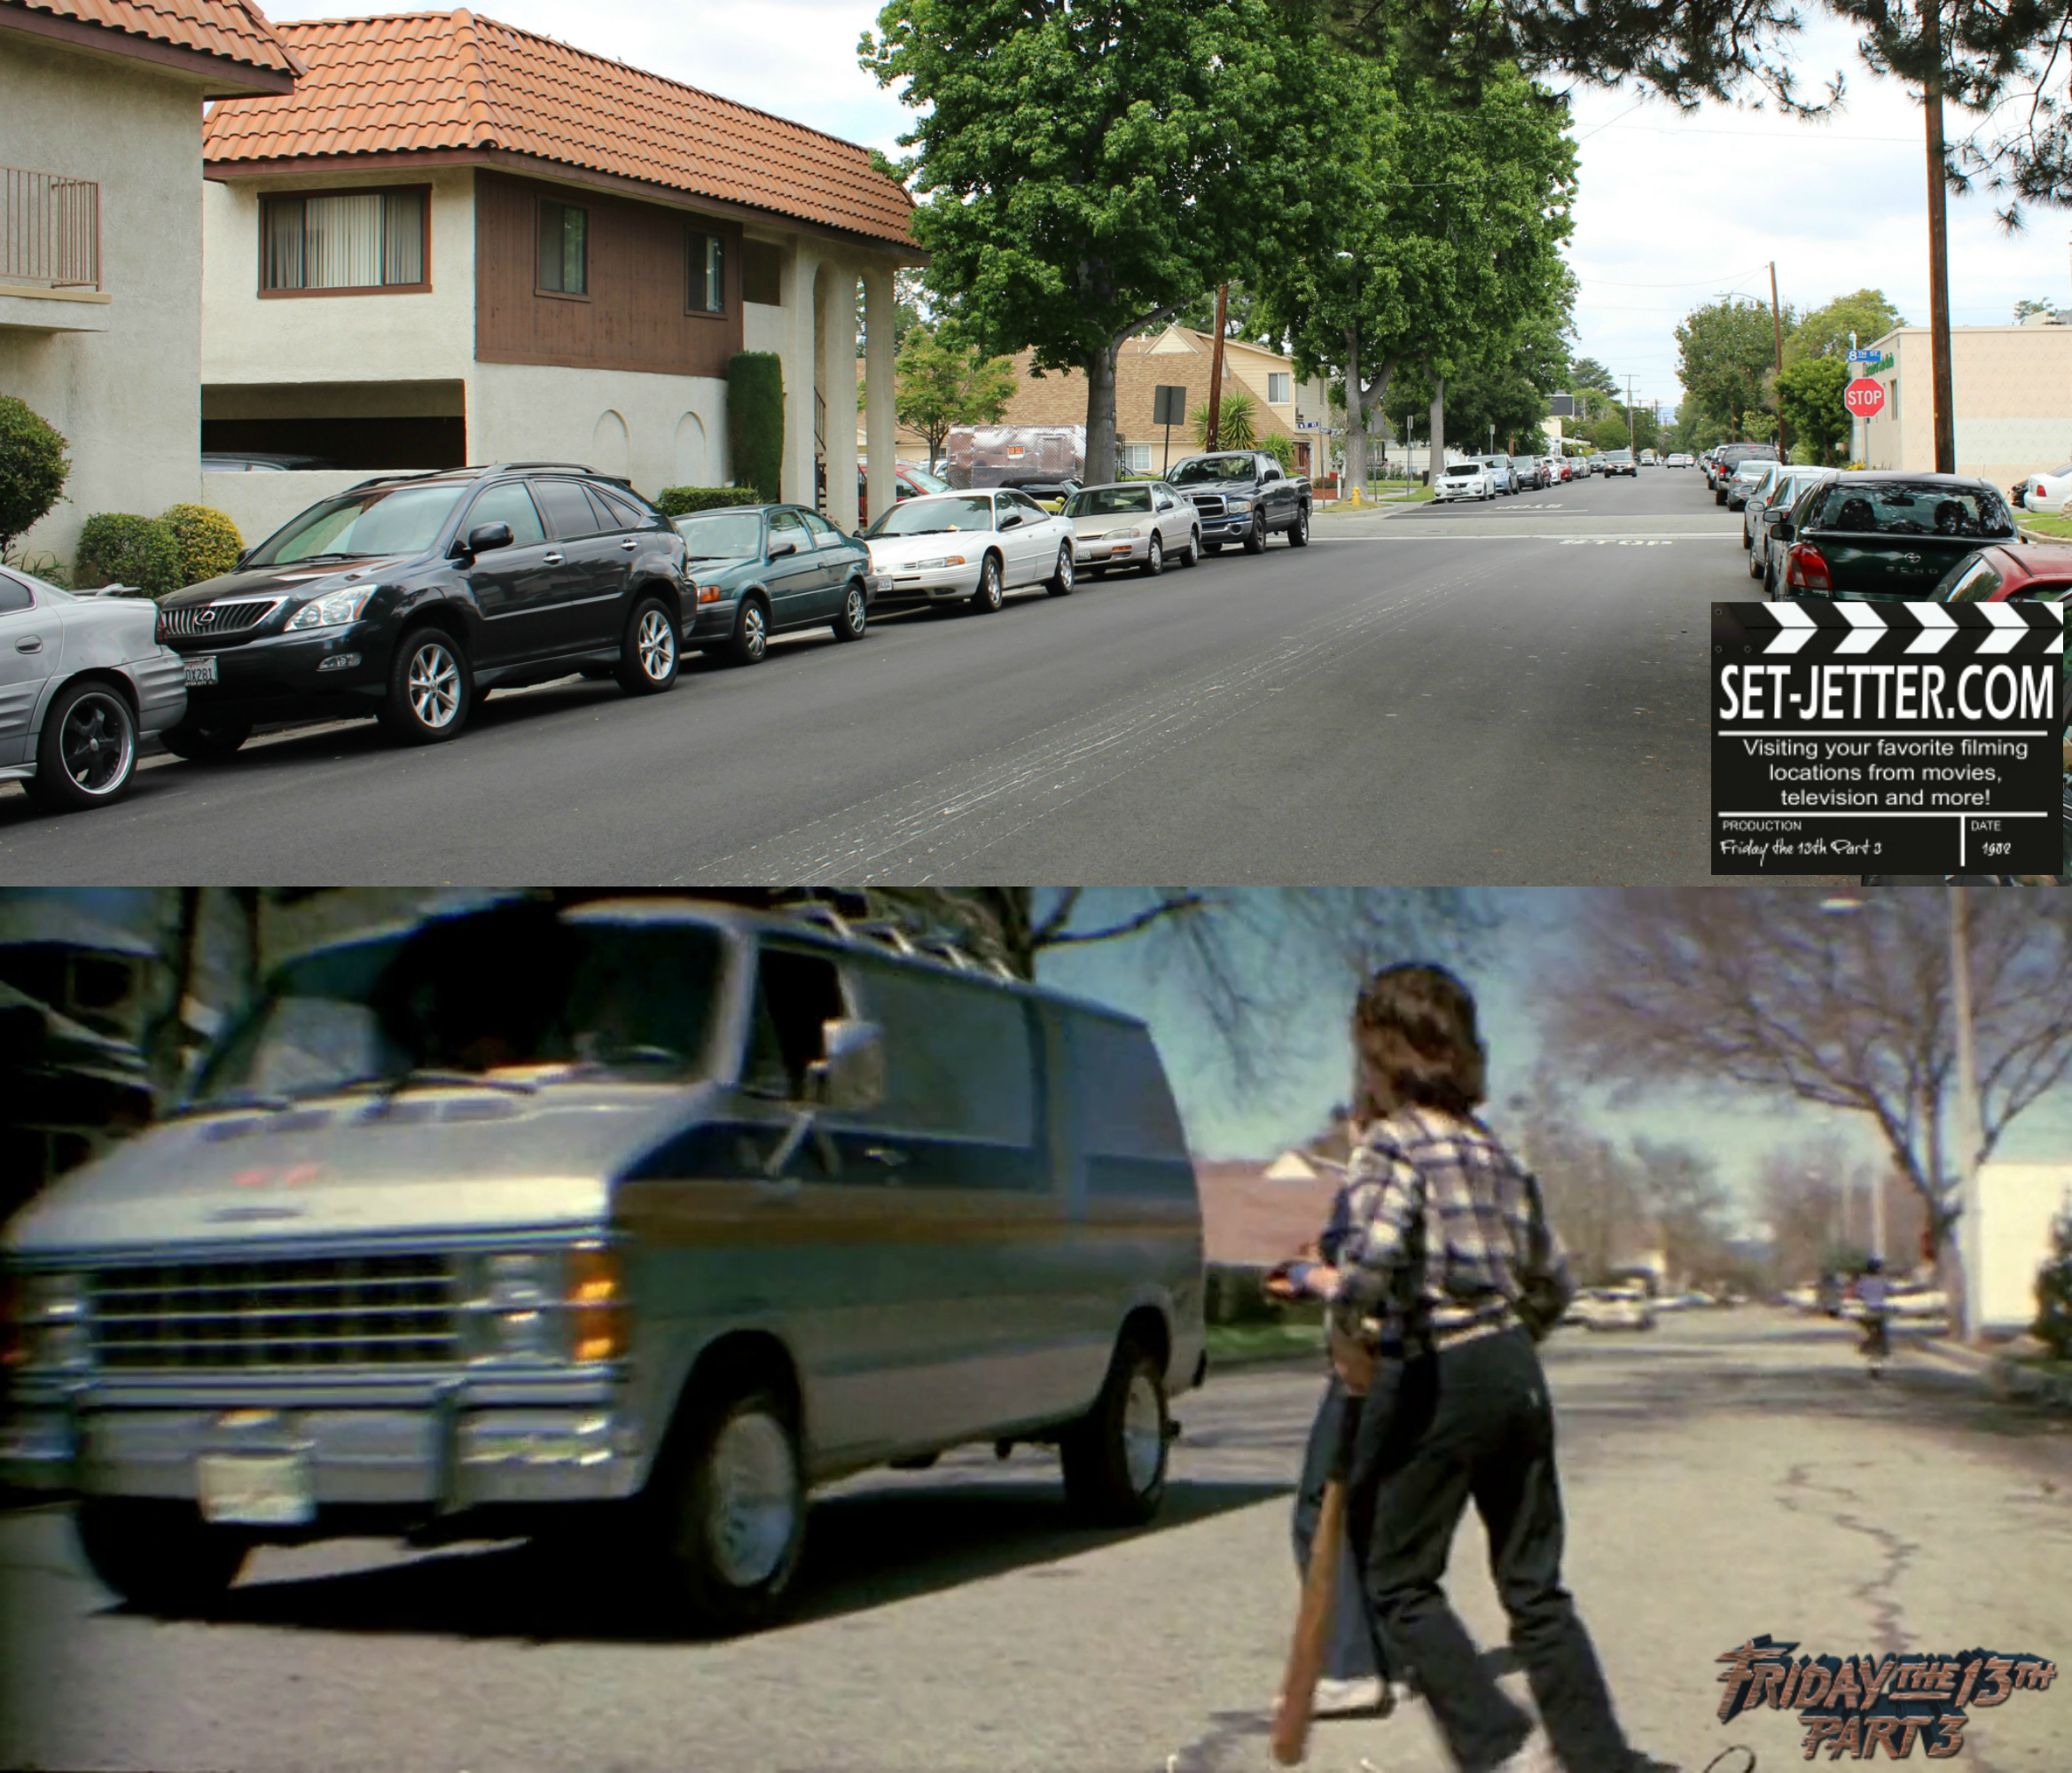 Friday the 13th Part 3 comparison 06.jpg